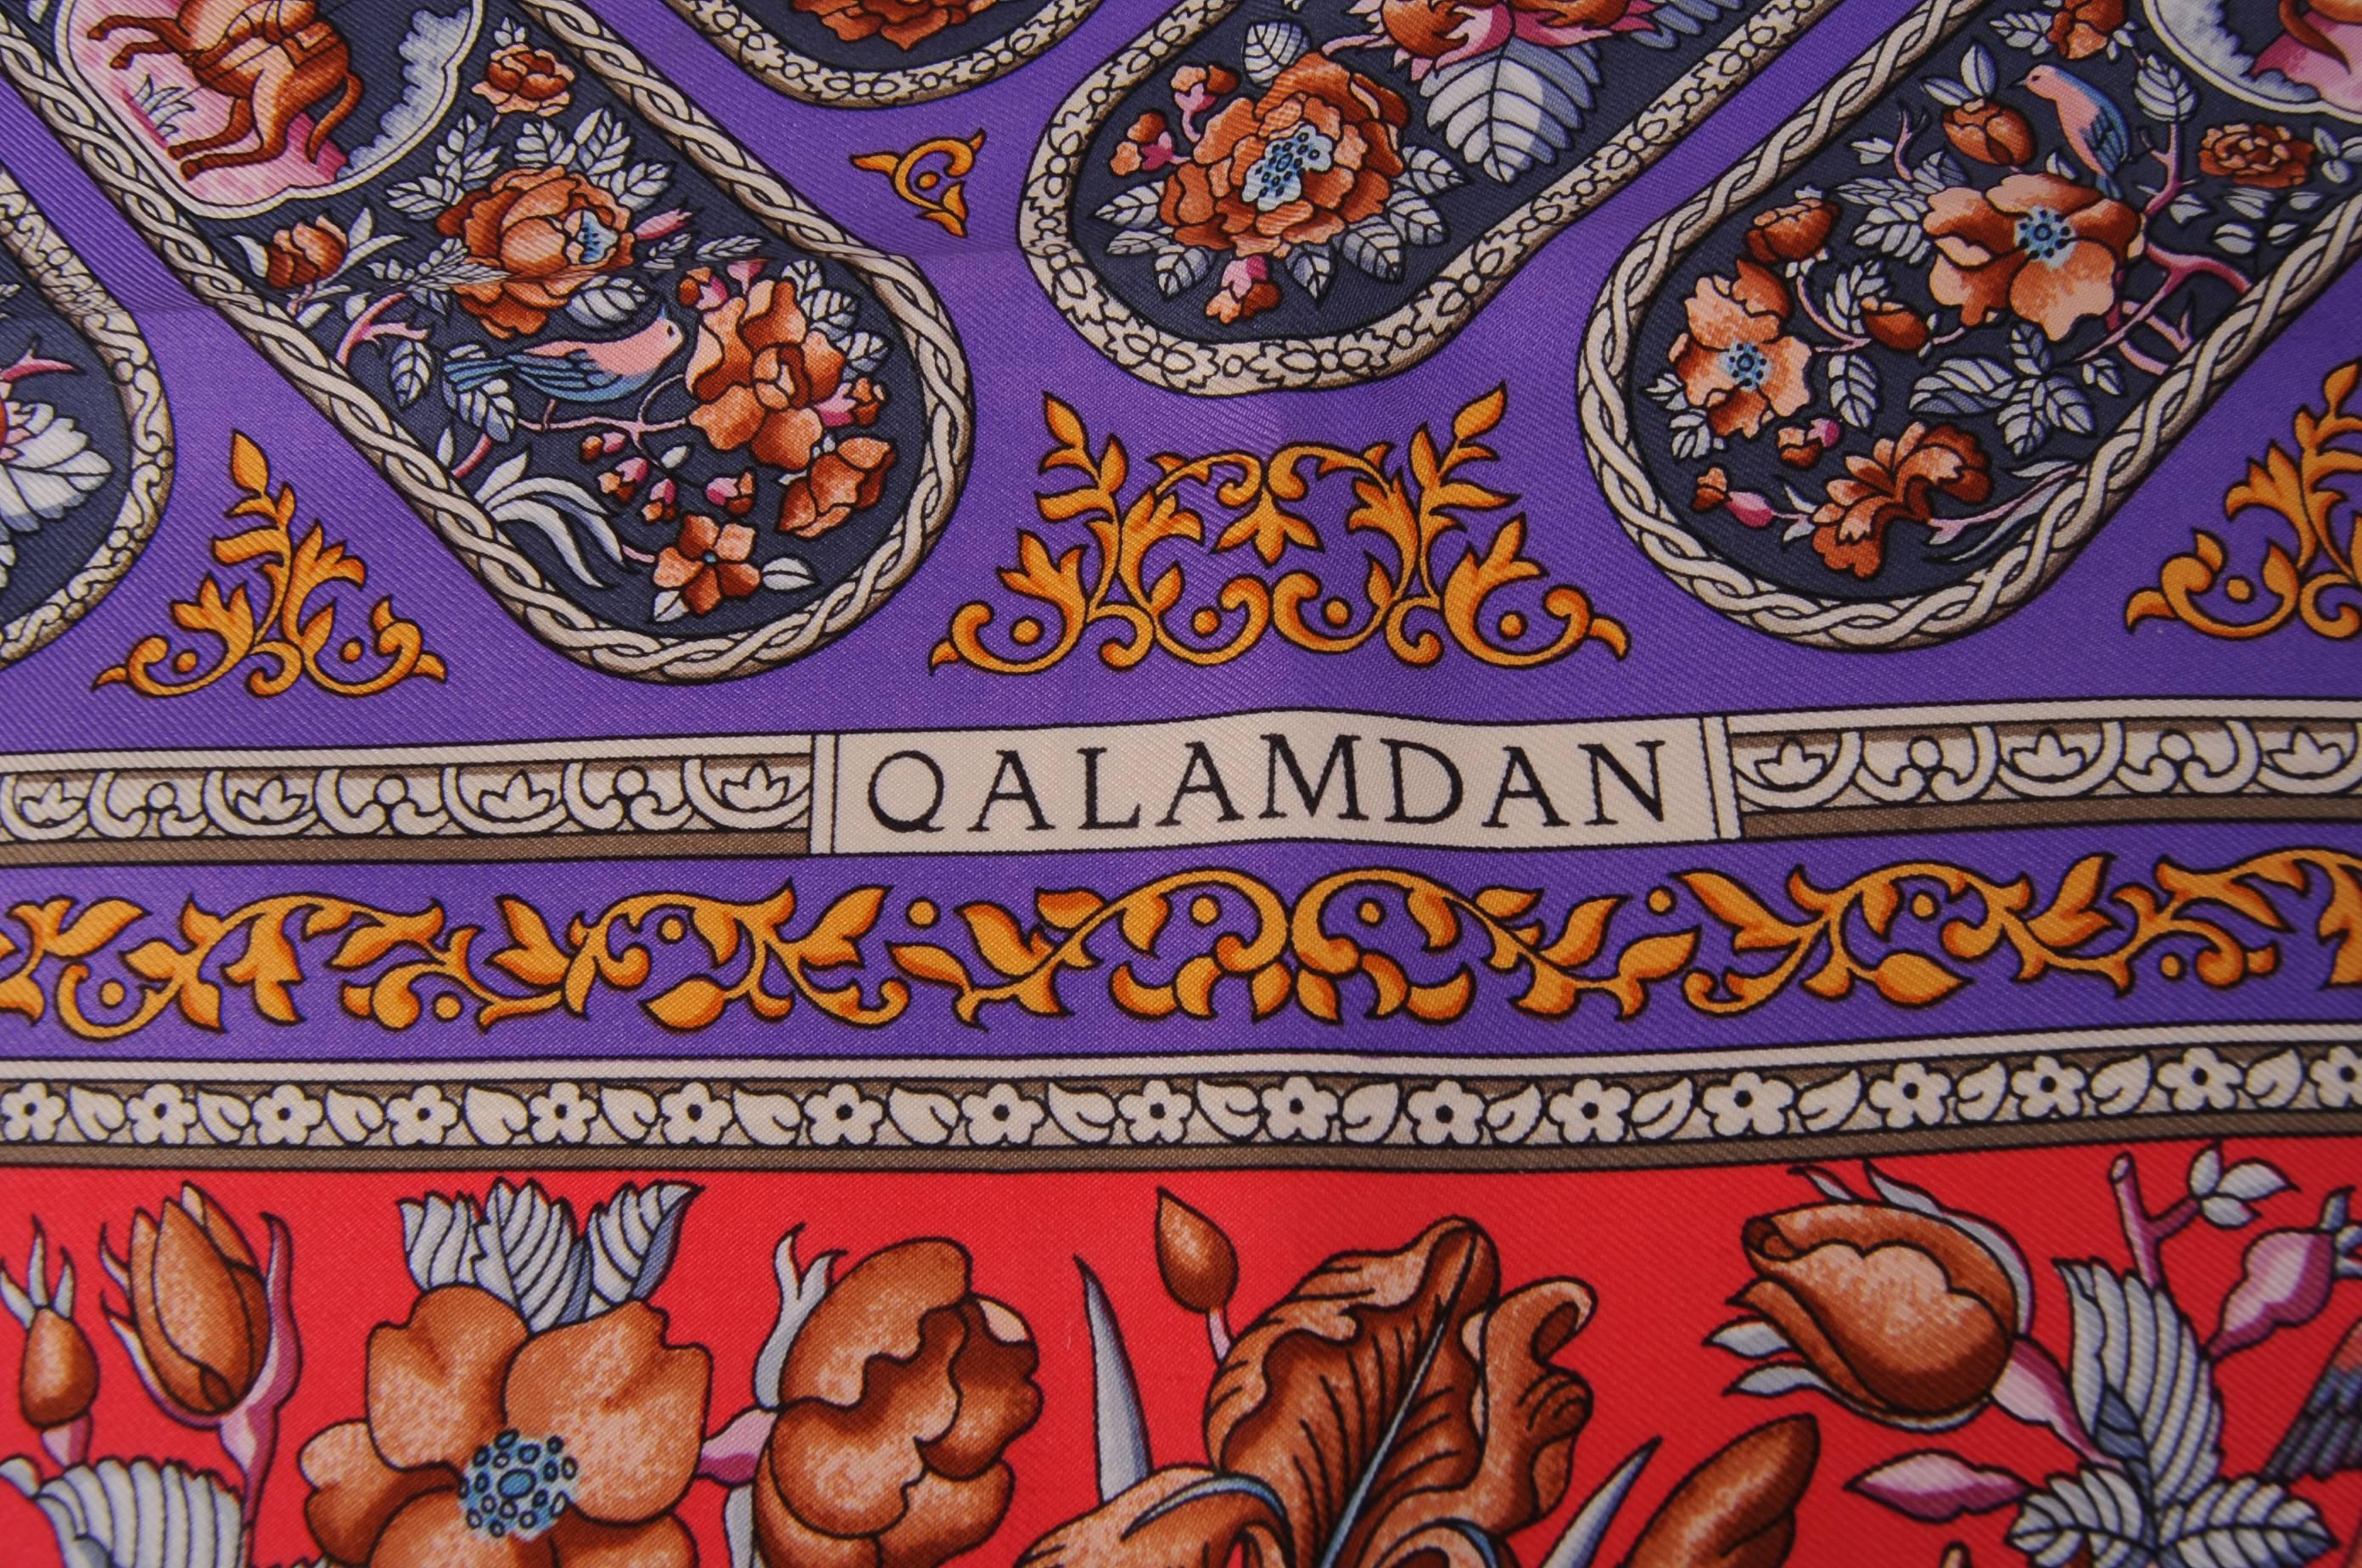 A beautiful Persian inspired design in red, brown, blue, gold and grey on royal purple includes men on horseback in the pattern. There are also birds and flowering vines. The scarf is fully marked and has never been worn. It is in excellent